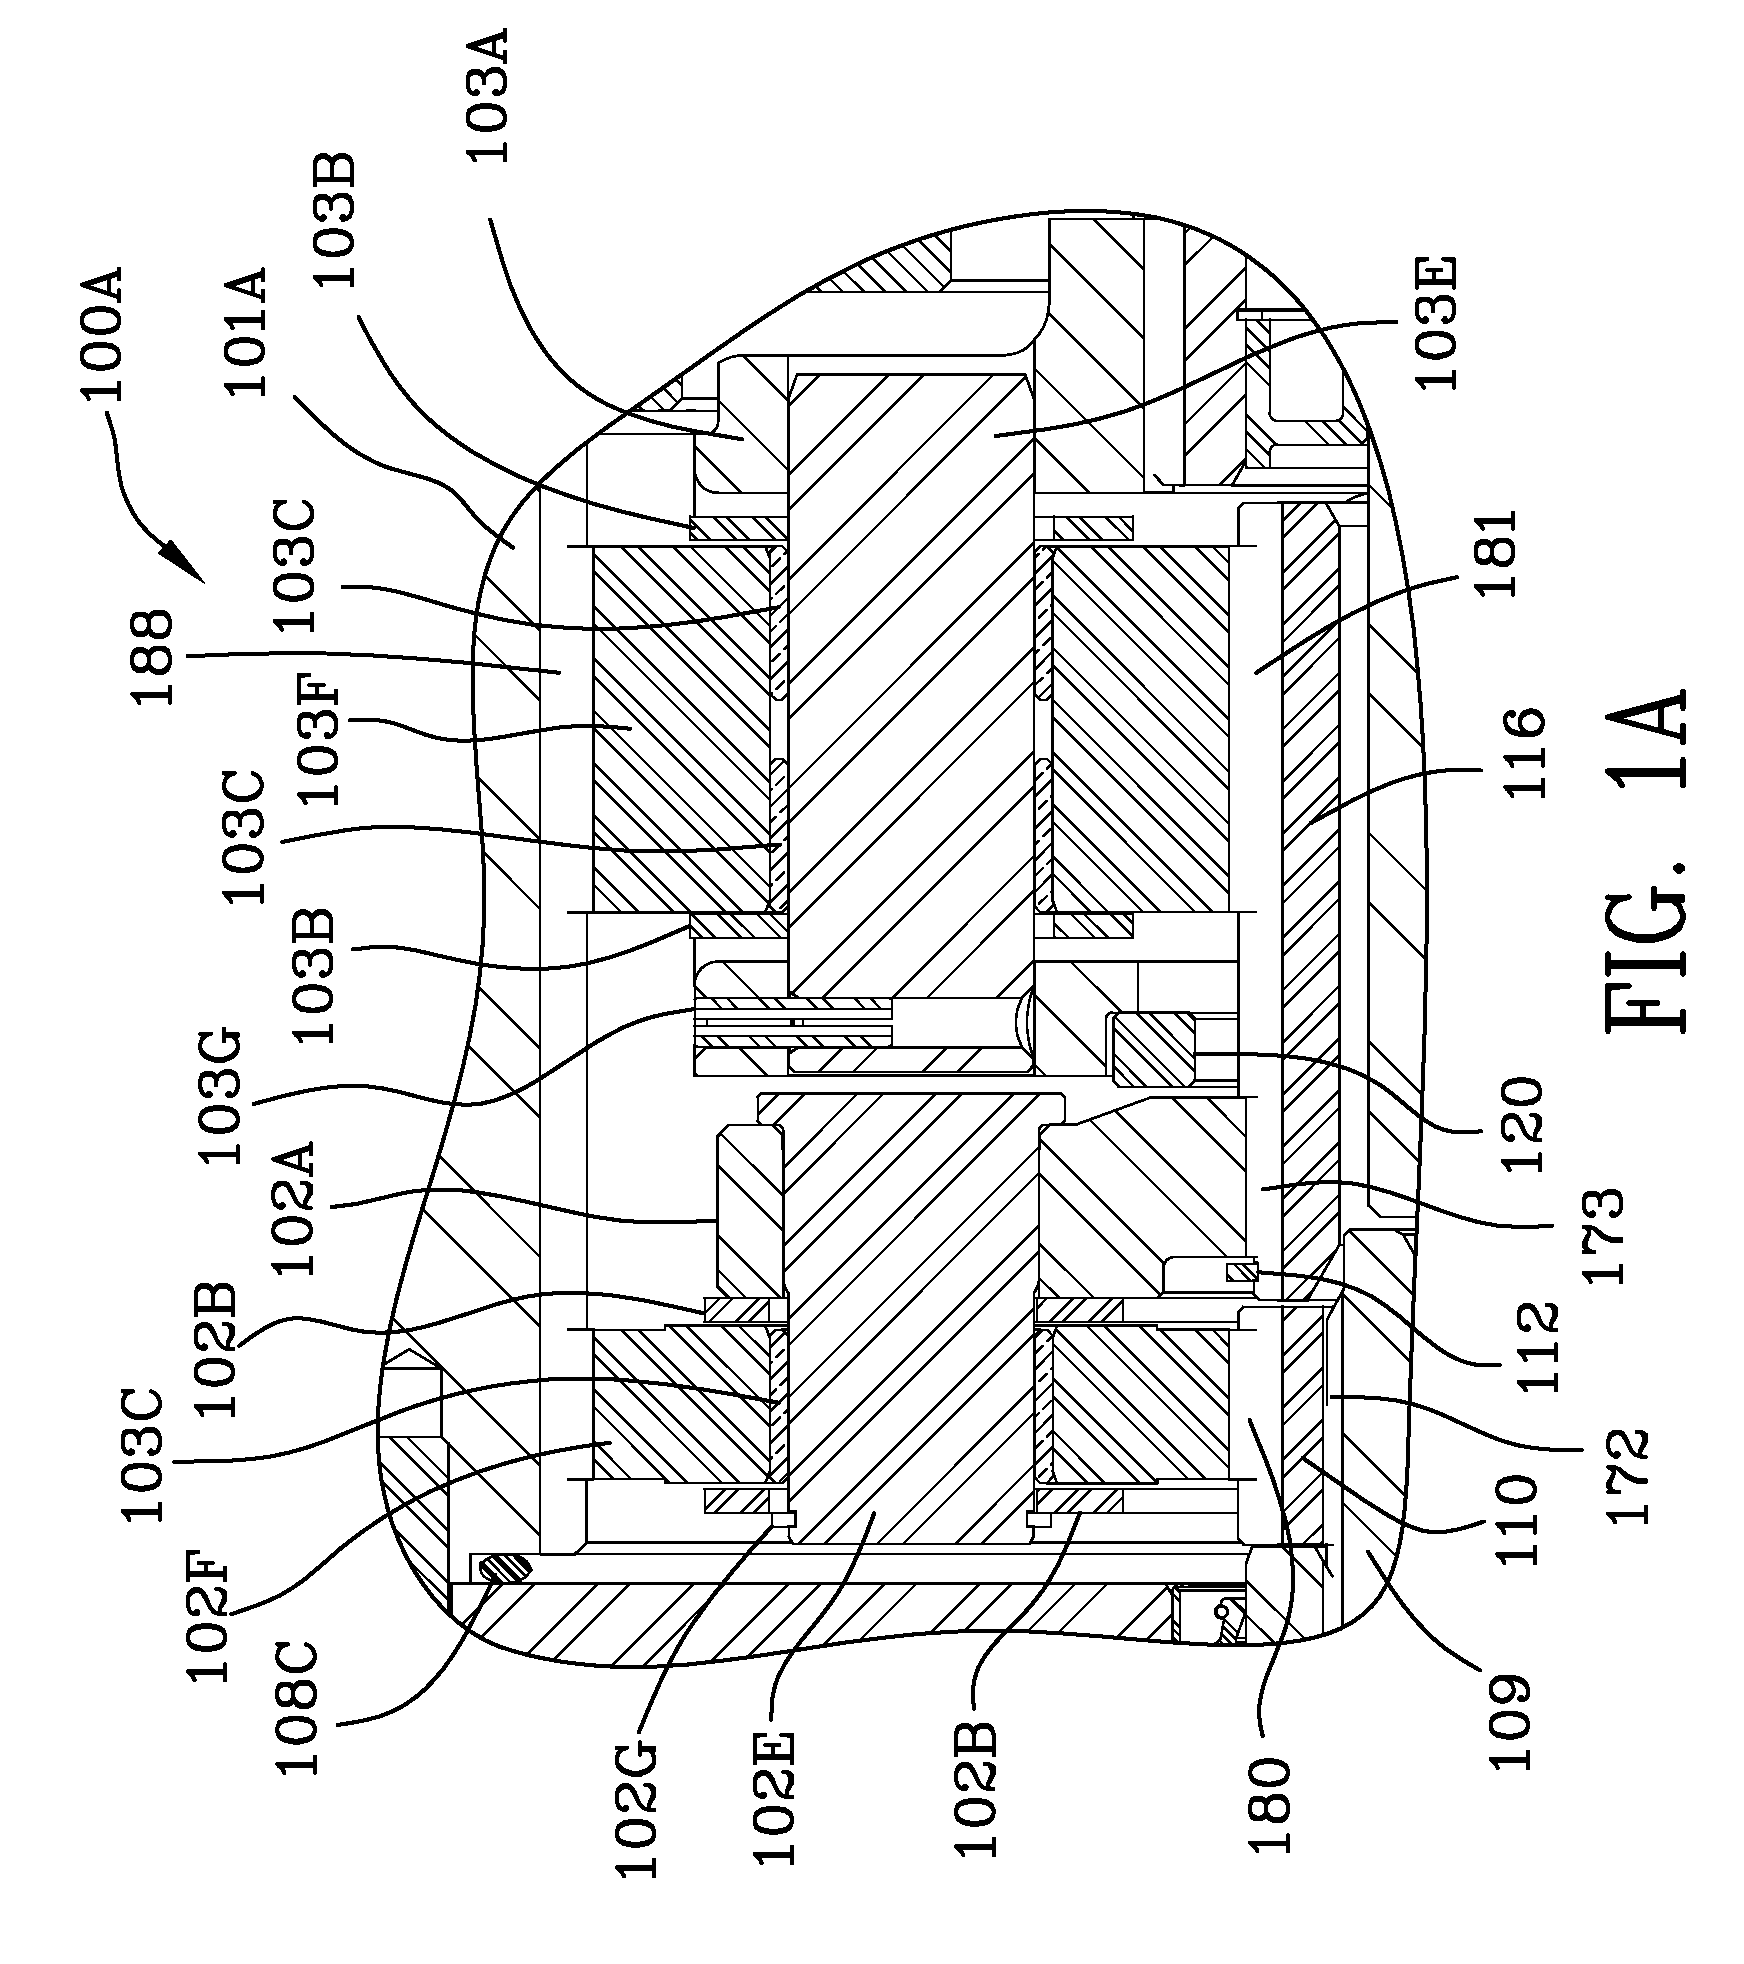 Gear reducer electric motor assembly with internal brake